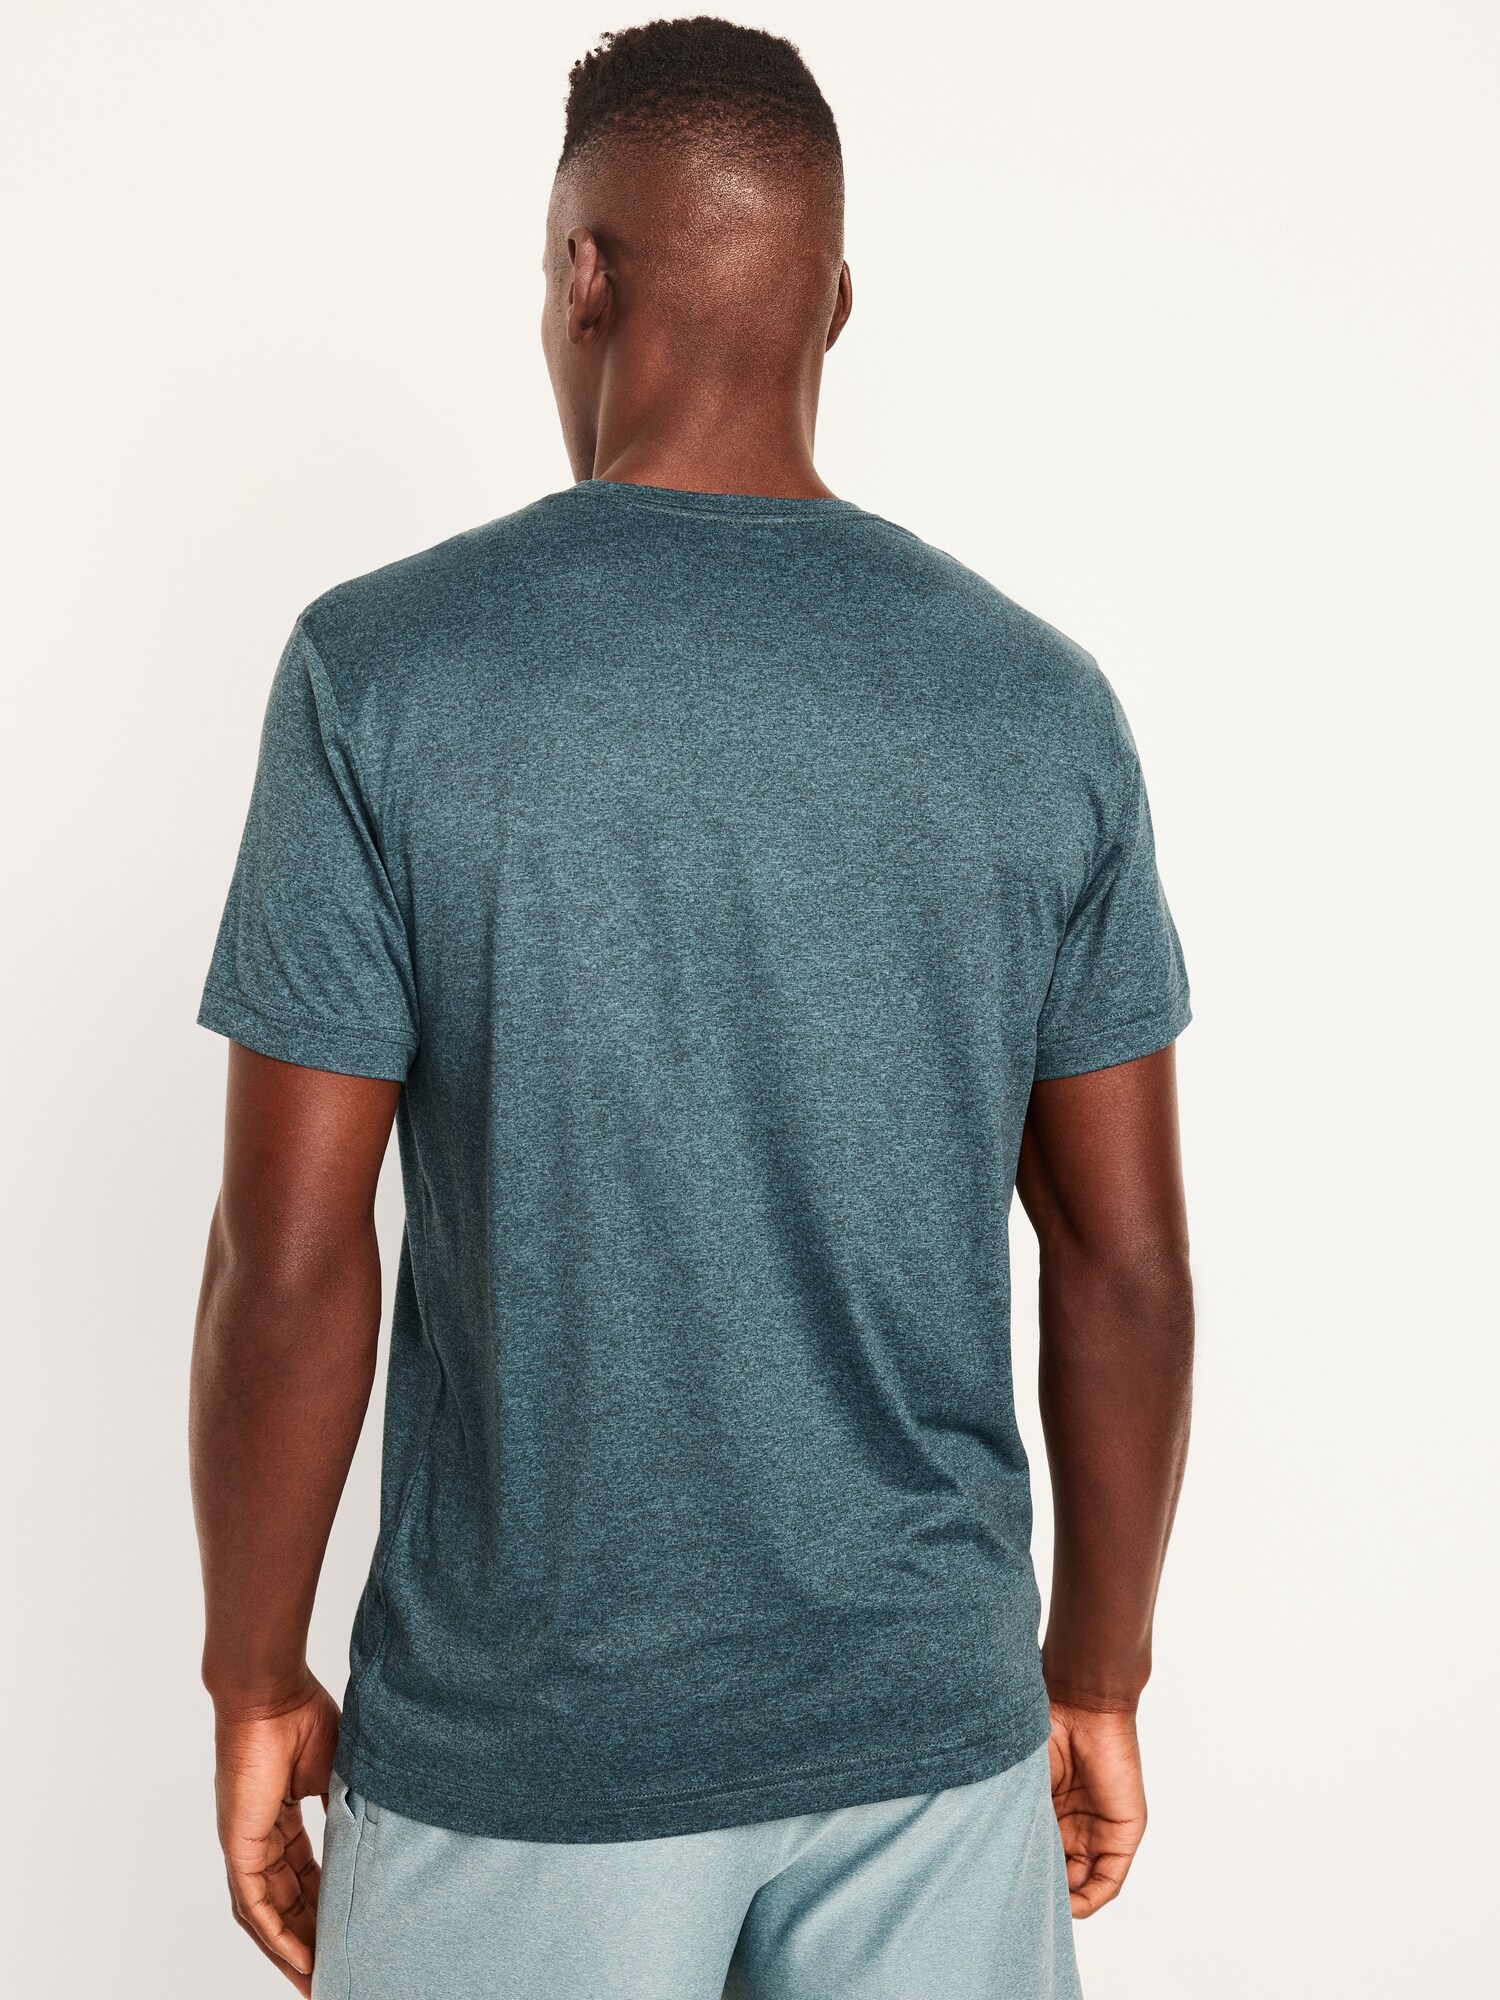 Cloud 94 Soft T-Shirt 3-Pack | Old Navy